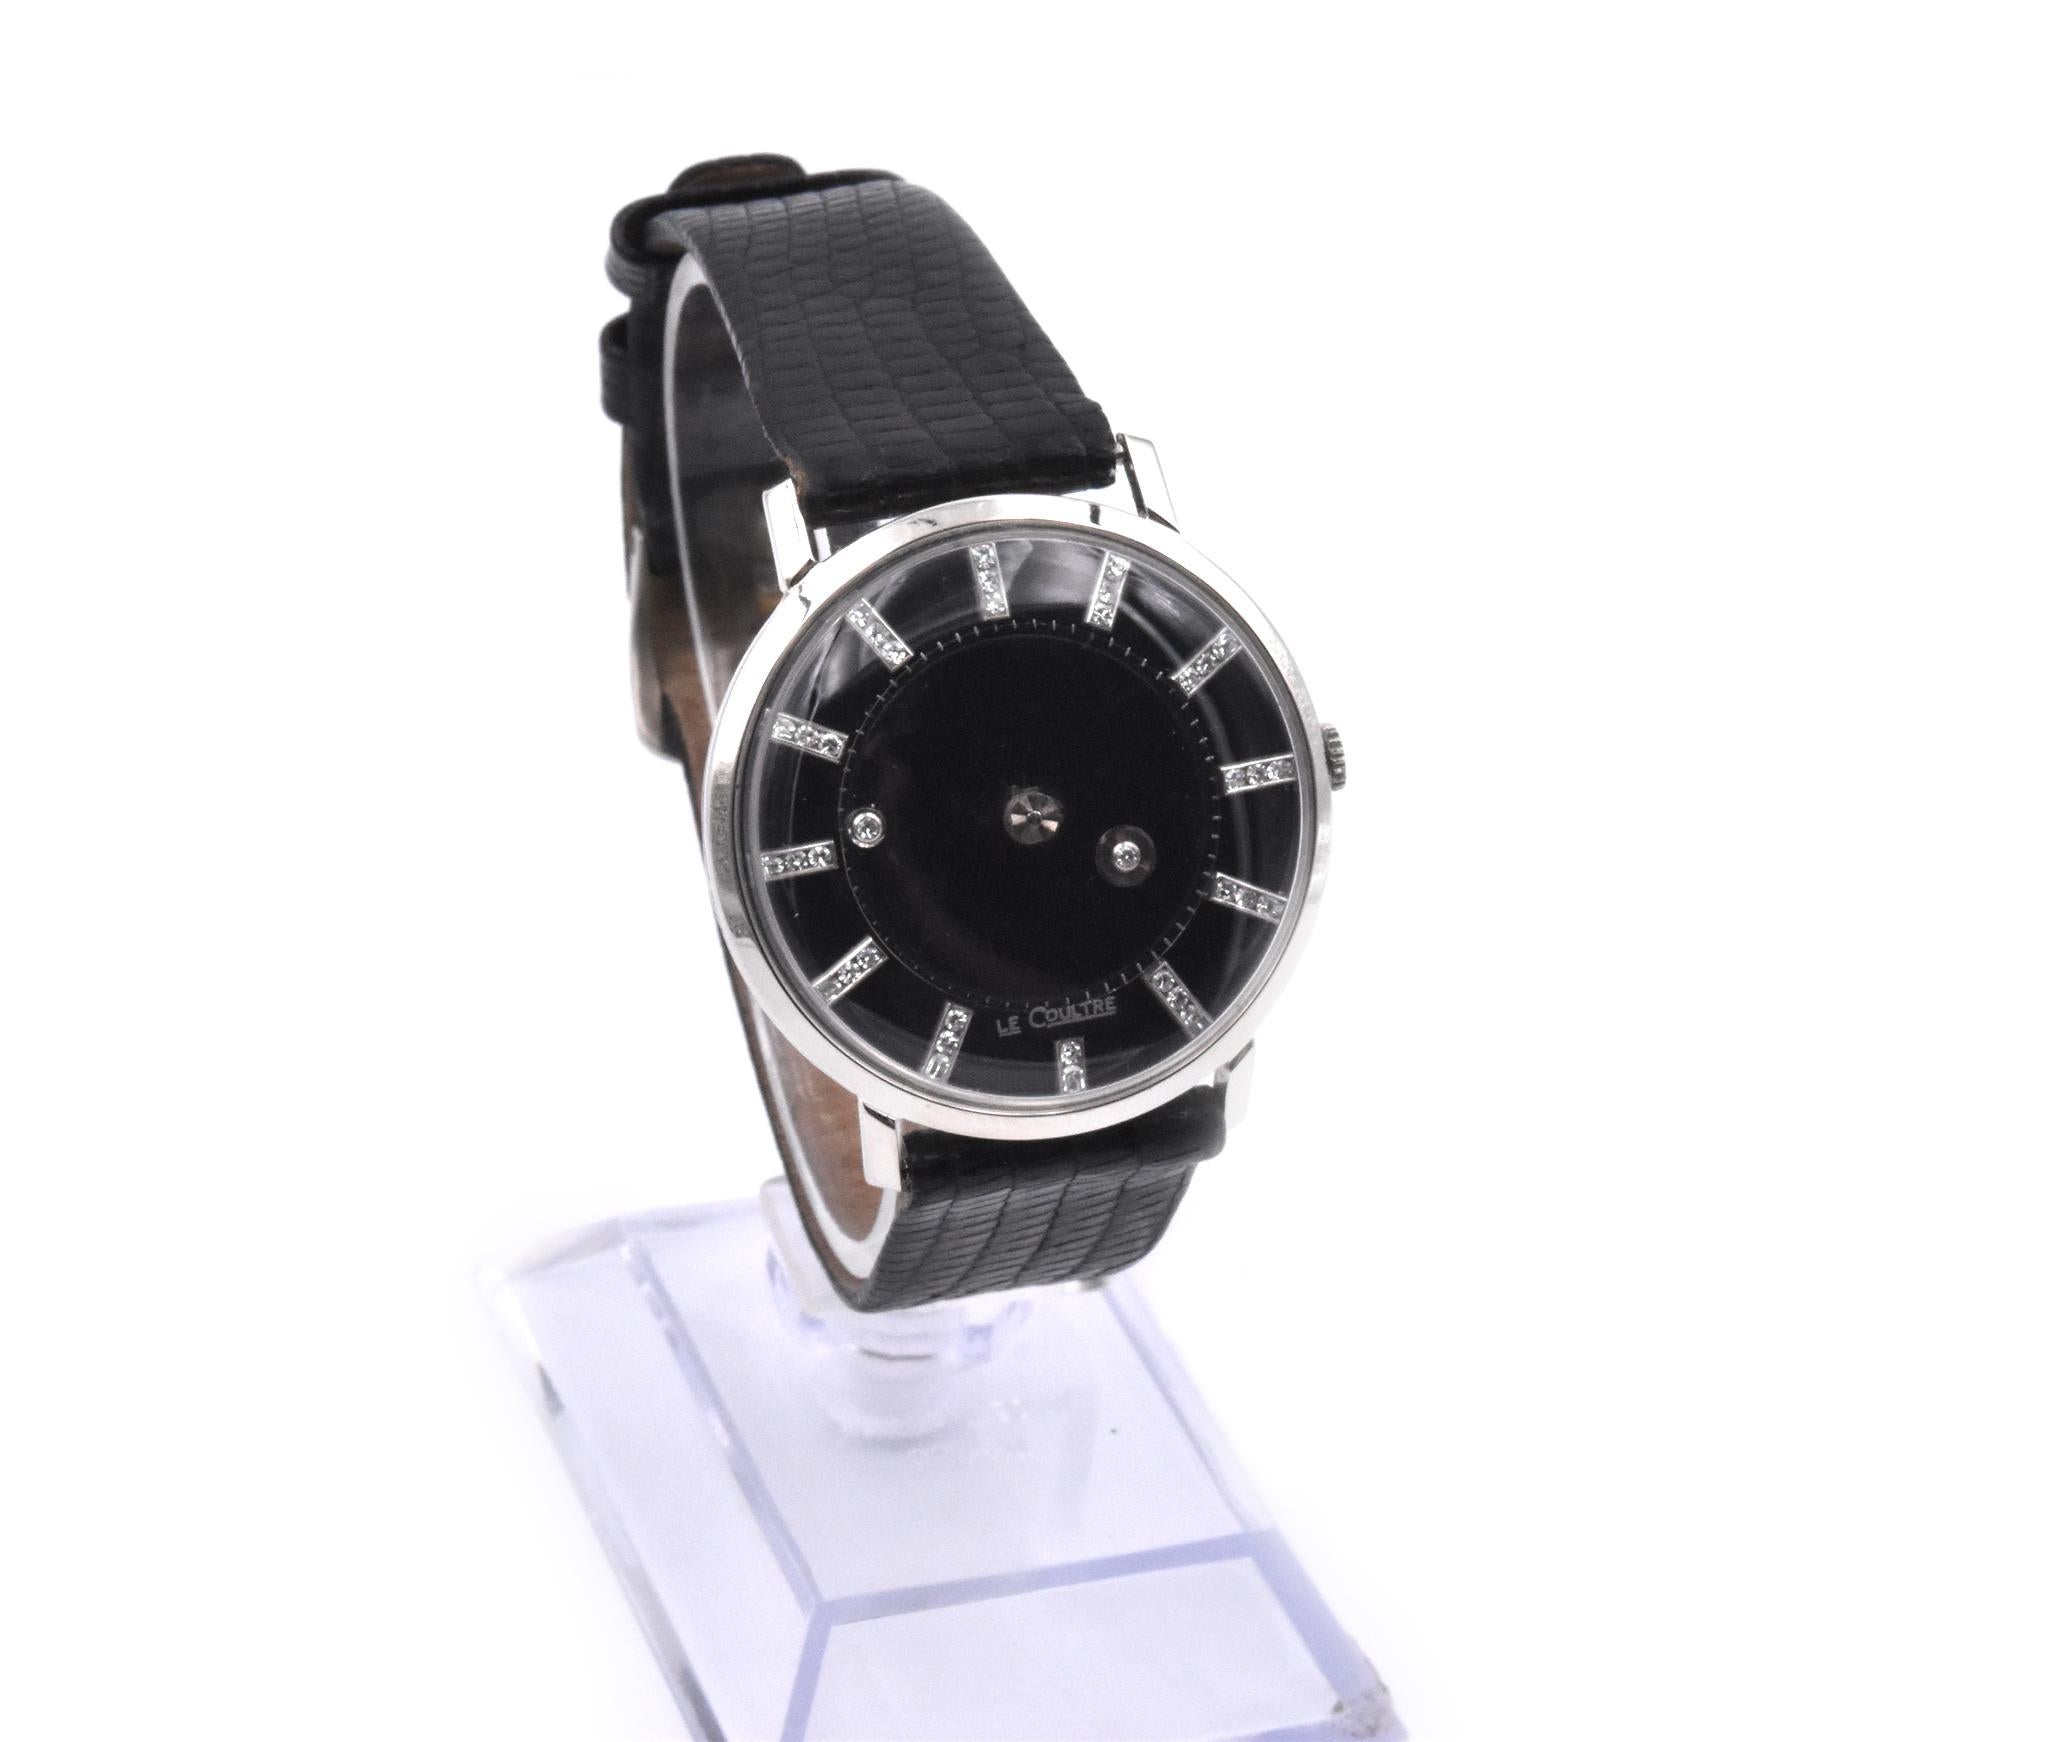 Movement: Manual Wind
Function: hours, minutes
Case: 33mm 14k white gold circular case, plexiglass crystal, push/pull crown
Dial: black dial, diamond dot hands, diamond hour markers
Band: black lizard strap with stainless steel buckle
  

Does not